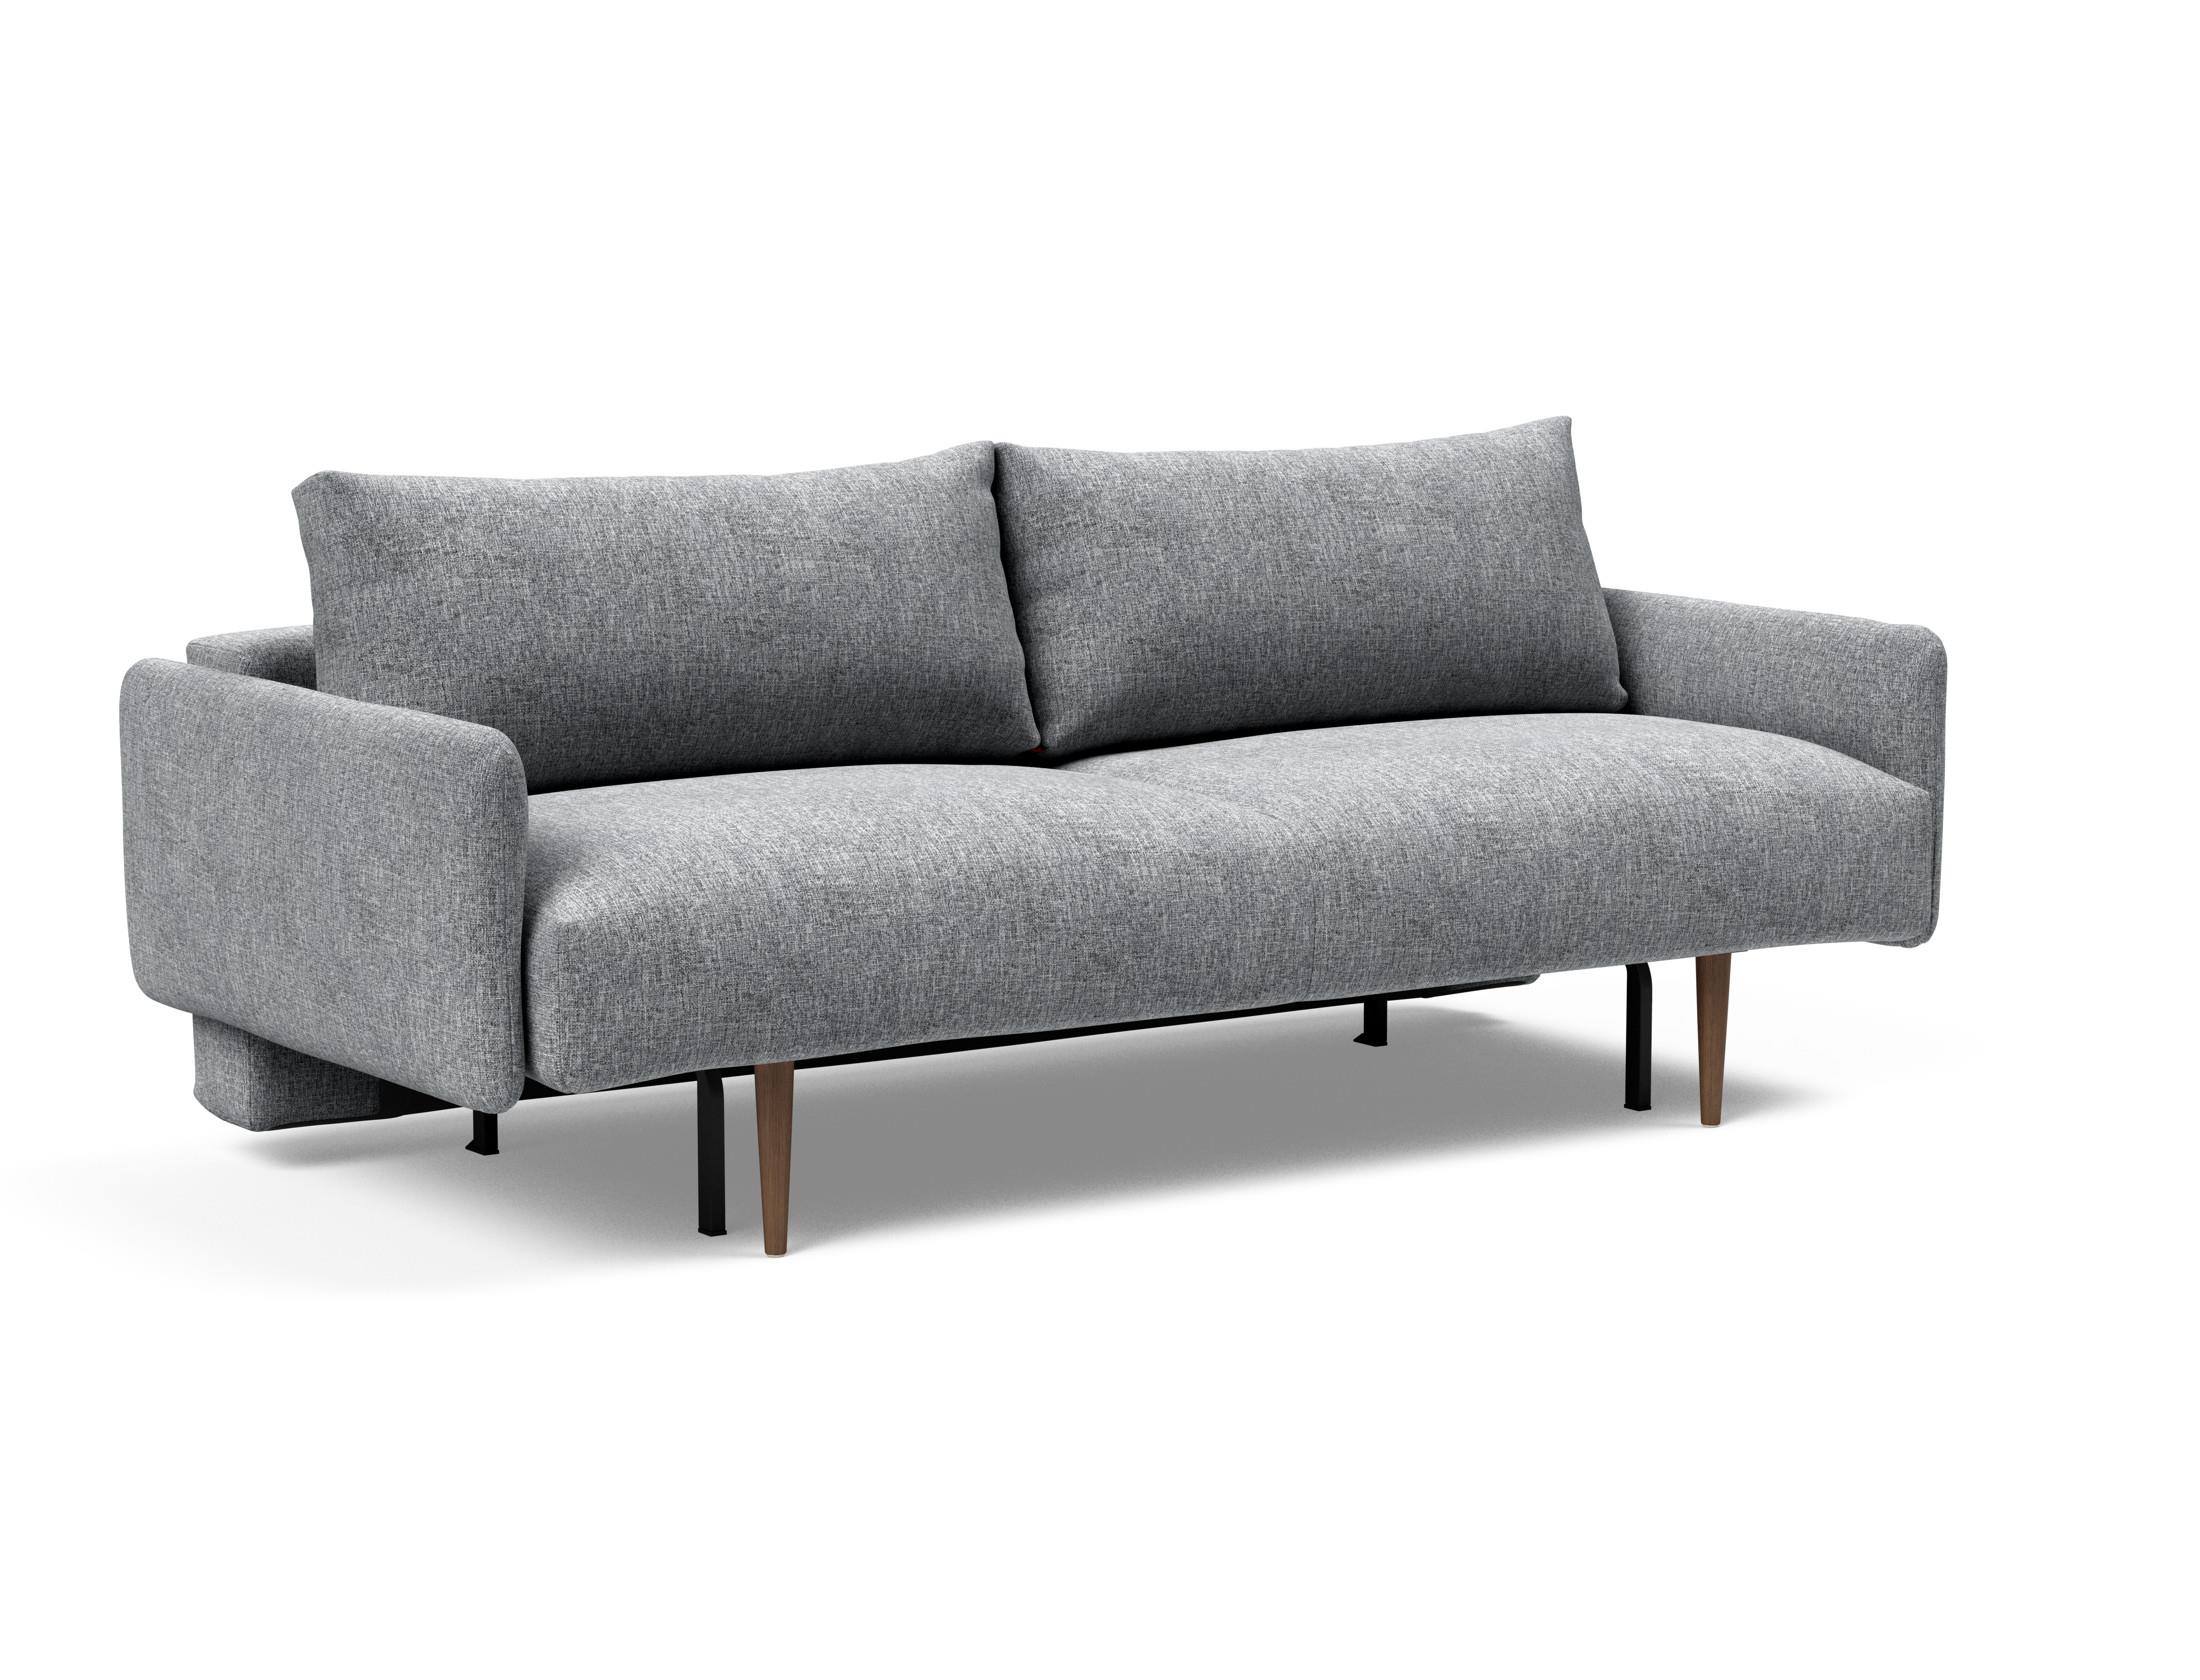 Frode-Dark-Styletto-Sofa-Bed-Upholstered-Arms-565-p2-web